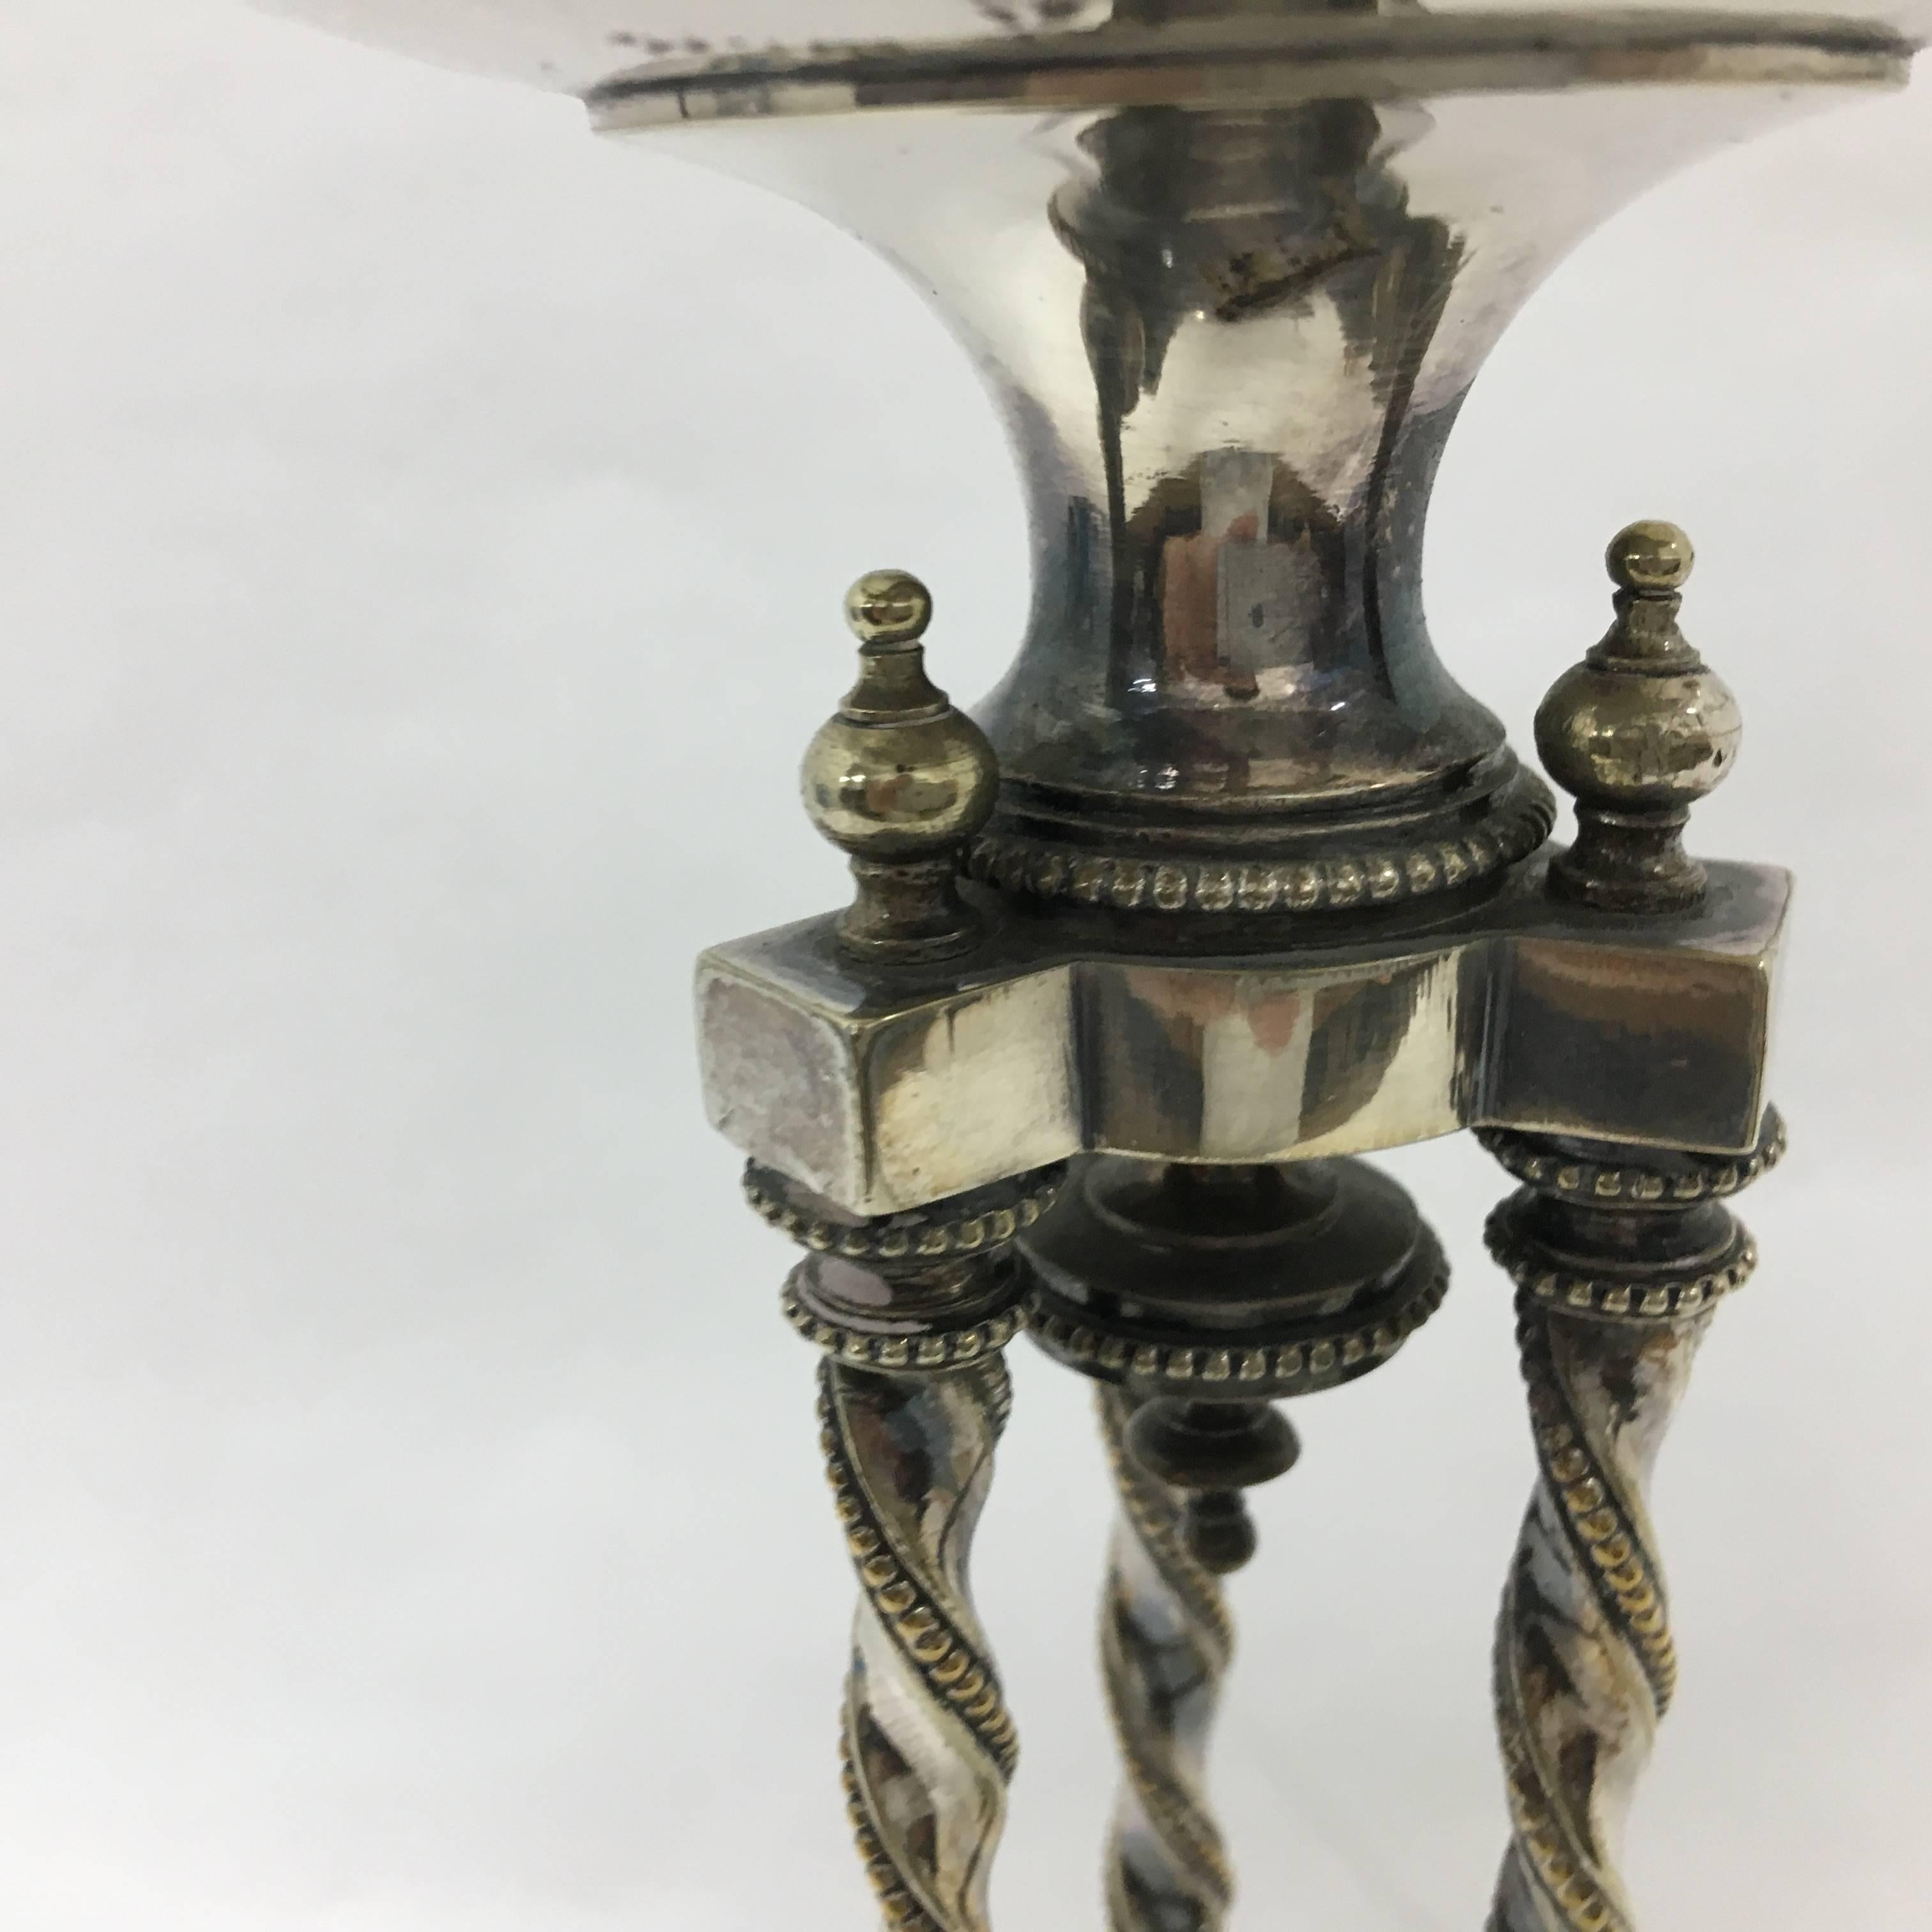 19th Century Victorian Silver Plated Centerpiece by Horace Woodward & Co., circa 1856